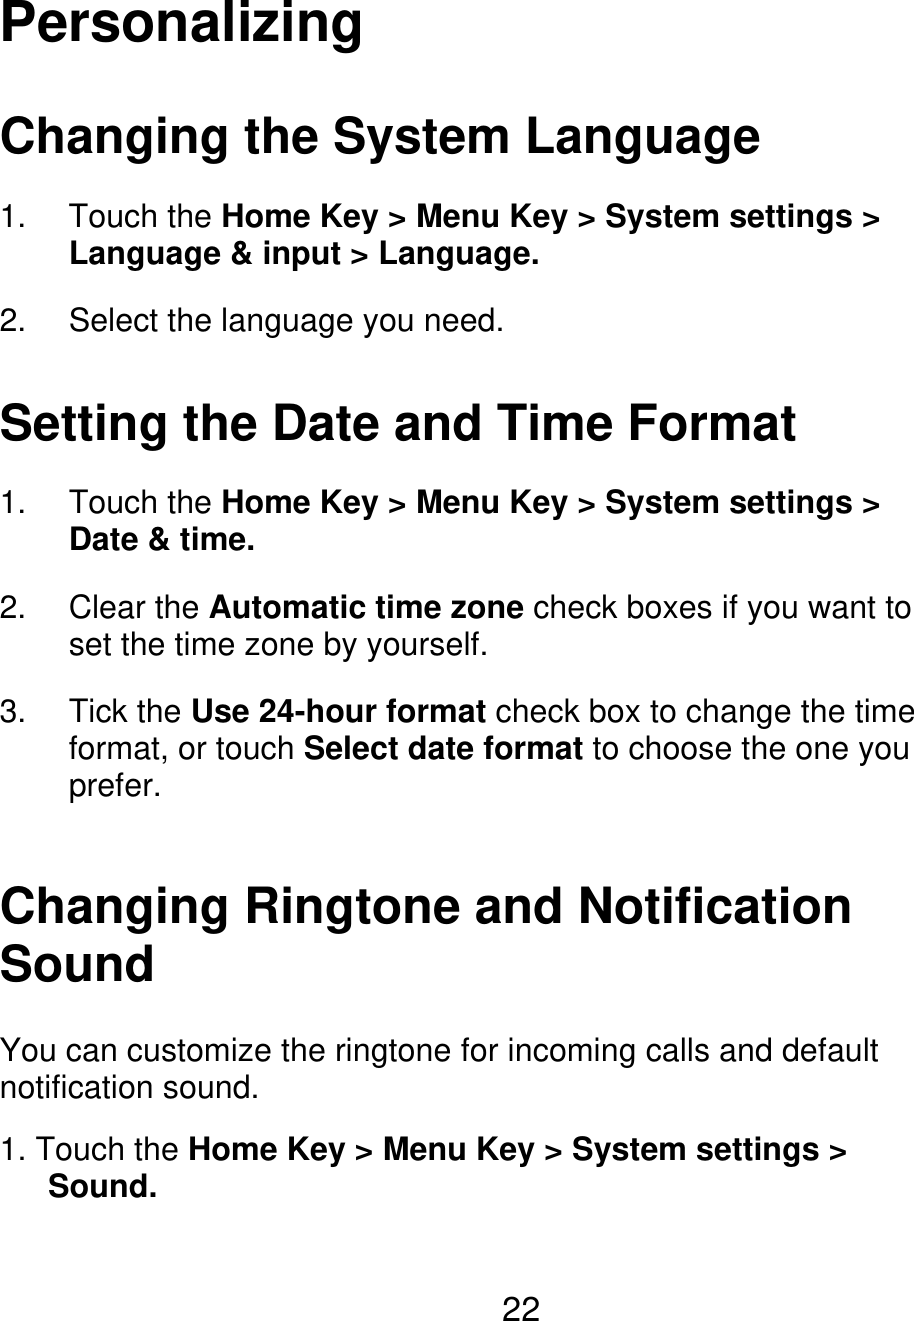 Personalizing Changing the System Language 1. 2. Touch the Home Key &gt; Menu Key &gt; System settings &gt; Language &amp; input &gt; Language. Select the language you need. Setting the Date and Time Format 1. 2. 3. Touch the Home Key &gt; Menu Key &gt; System settings &gt; Date &amp; time. Clear the Automatic time zone check boxes if you want to set the time zone by yourself. Tick the Use 24-hour format check box to change the time format, or touch Select date format to choose the one you prefer. Changing Ringtone and Notification Sound You can customize the ringtone for incoming calls and default notification sound. 1. Touch the Home Key &gt; Menu Key &gt; System settings &gt;    Sound. 22 